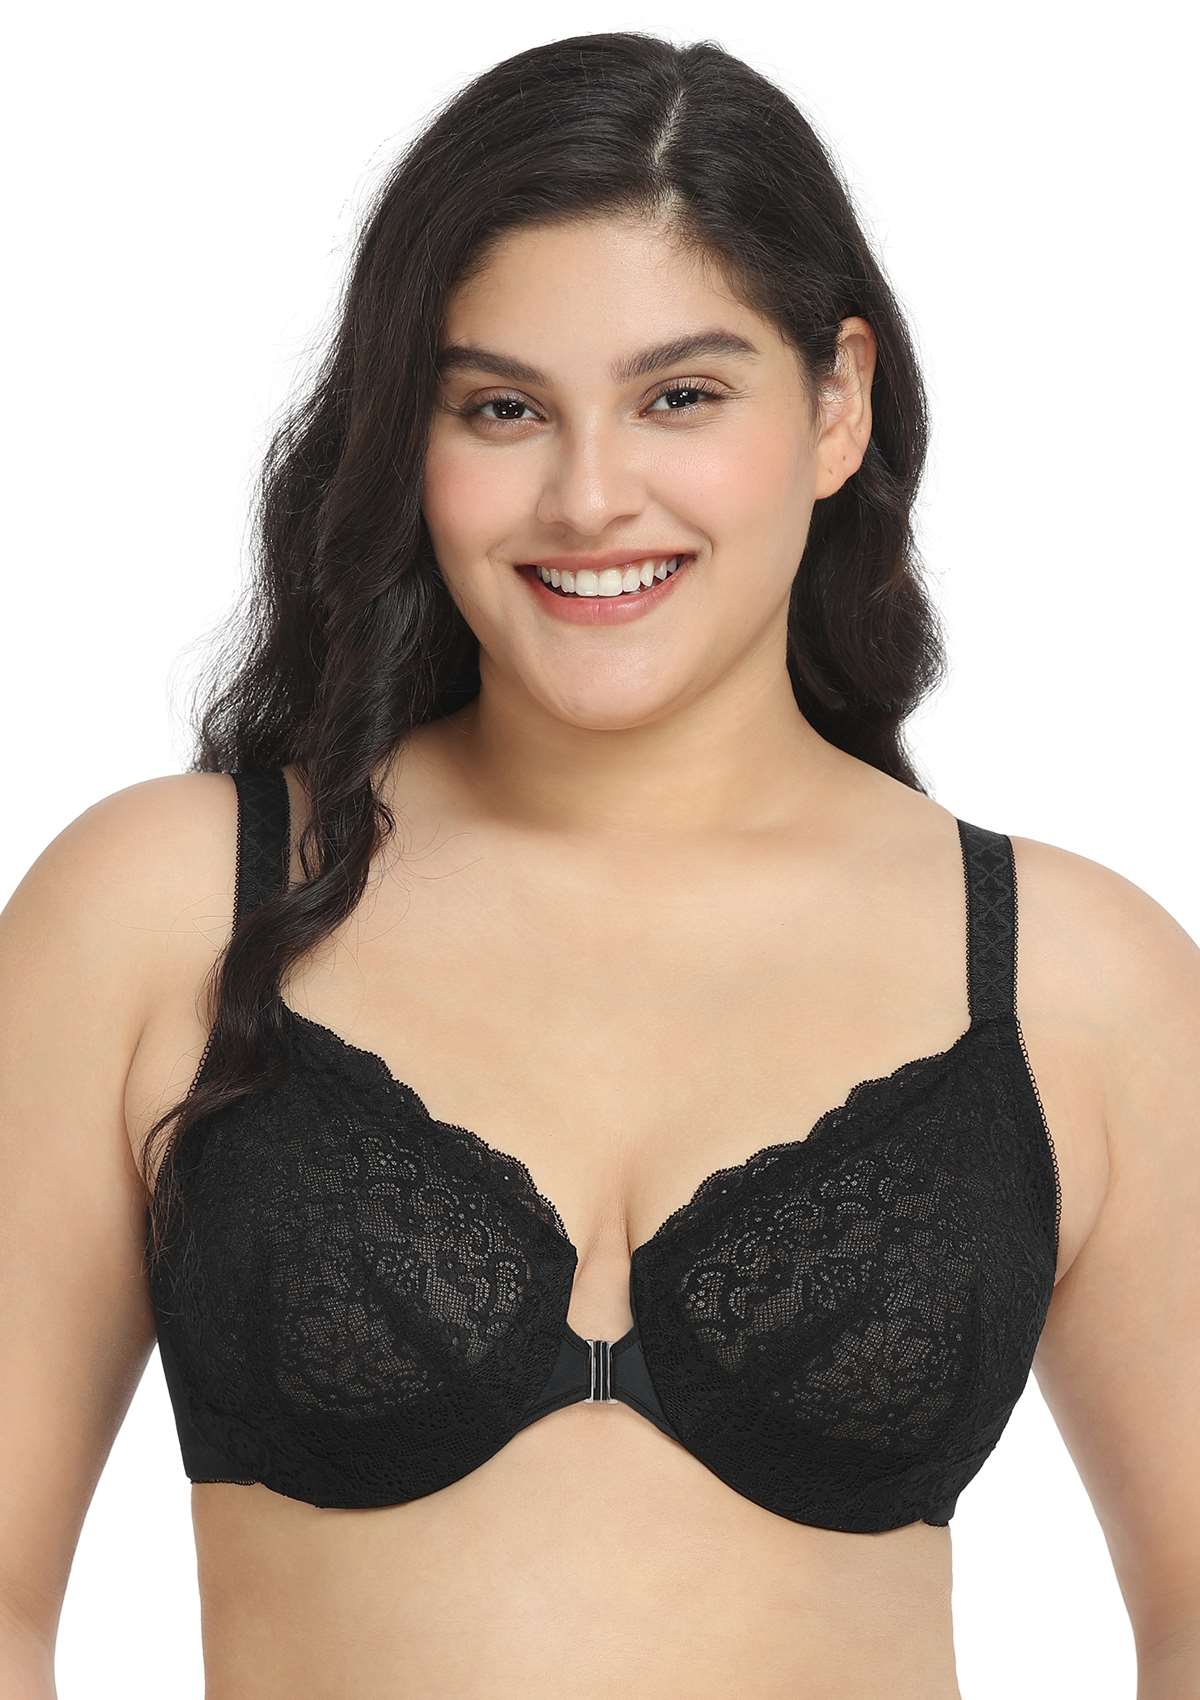 HSIA Nymphaea Front-Close Unlined Retro Floral Lace Back Smoothing Bra - Black / 44 / C